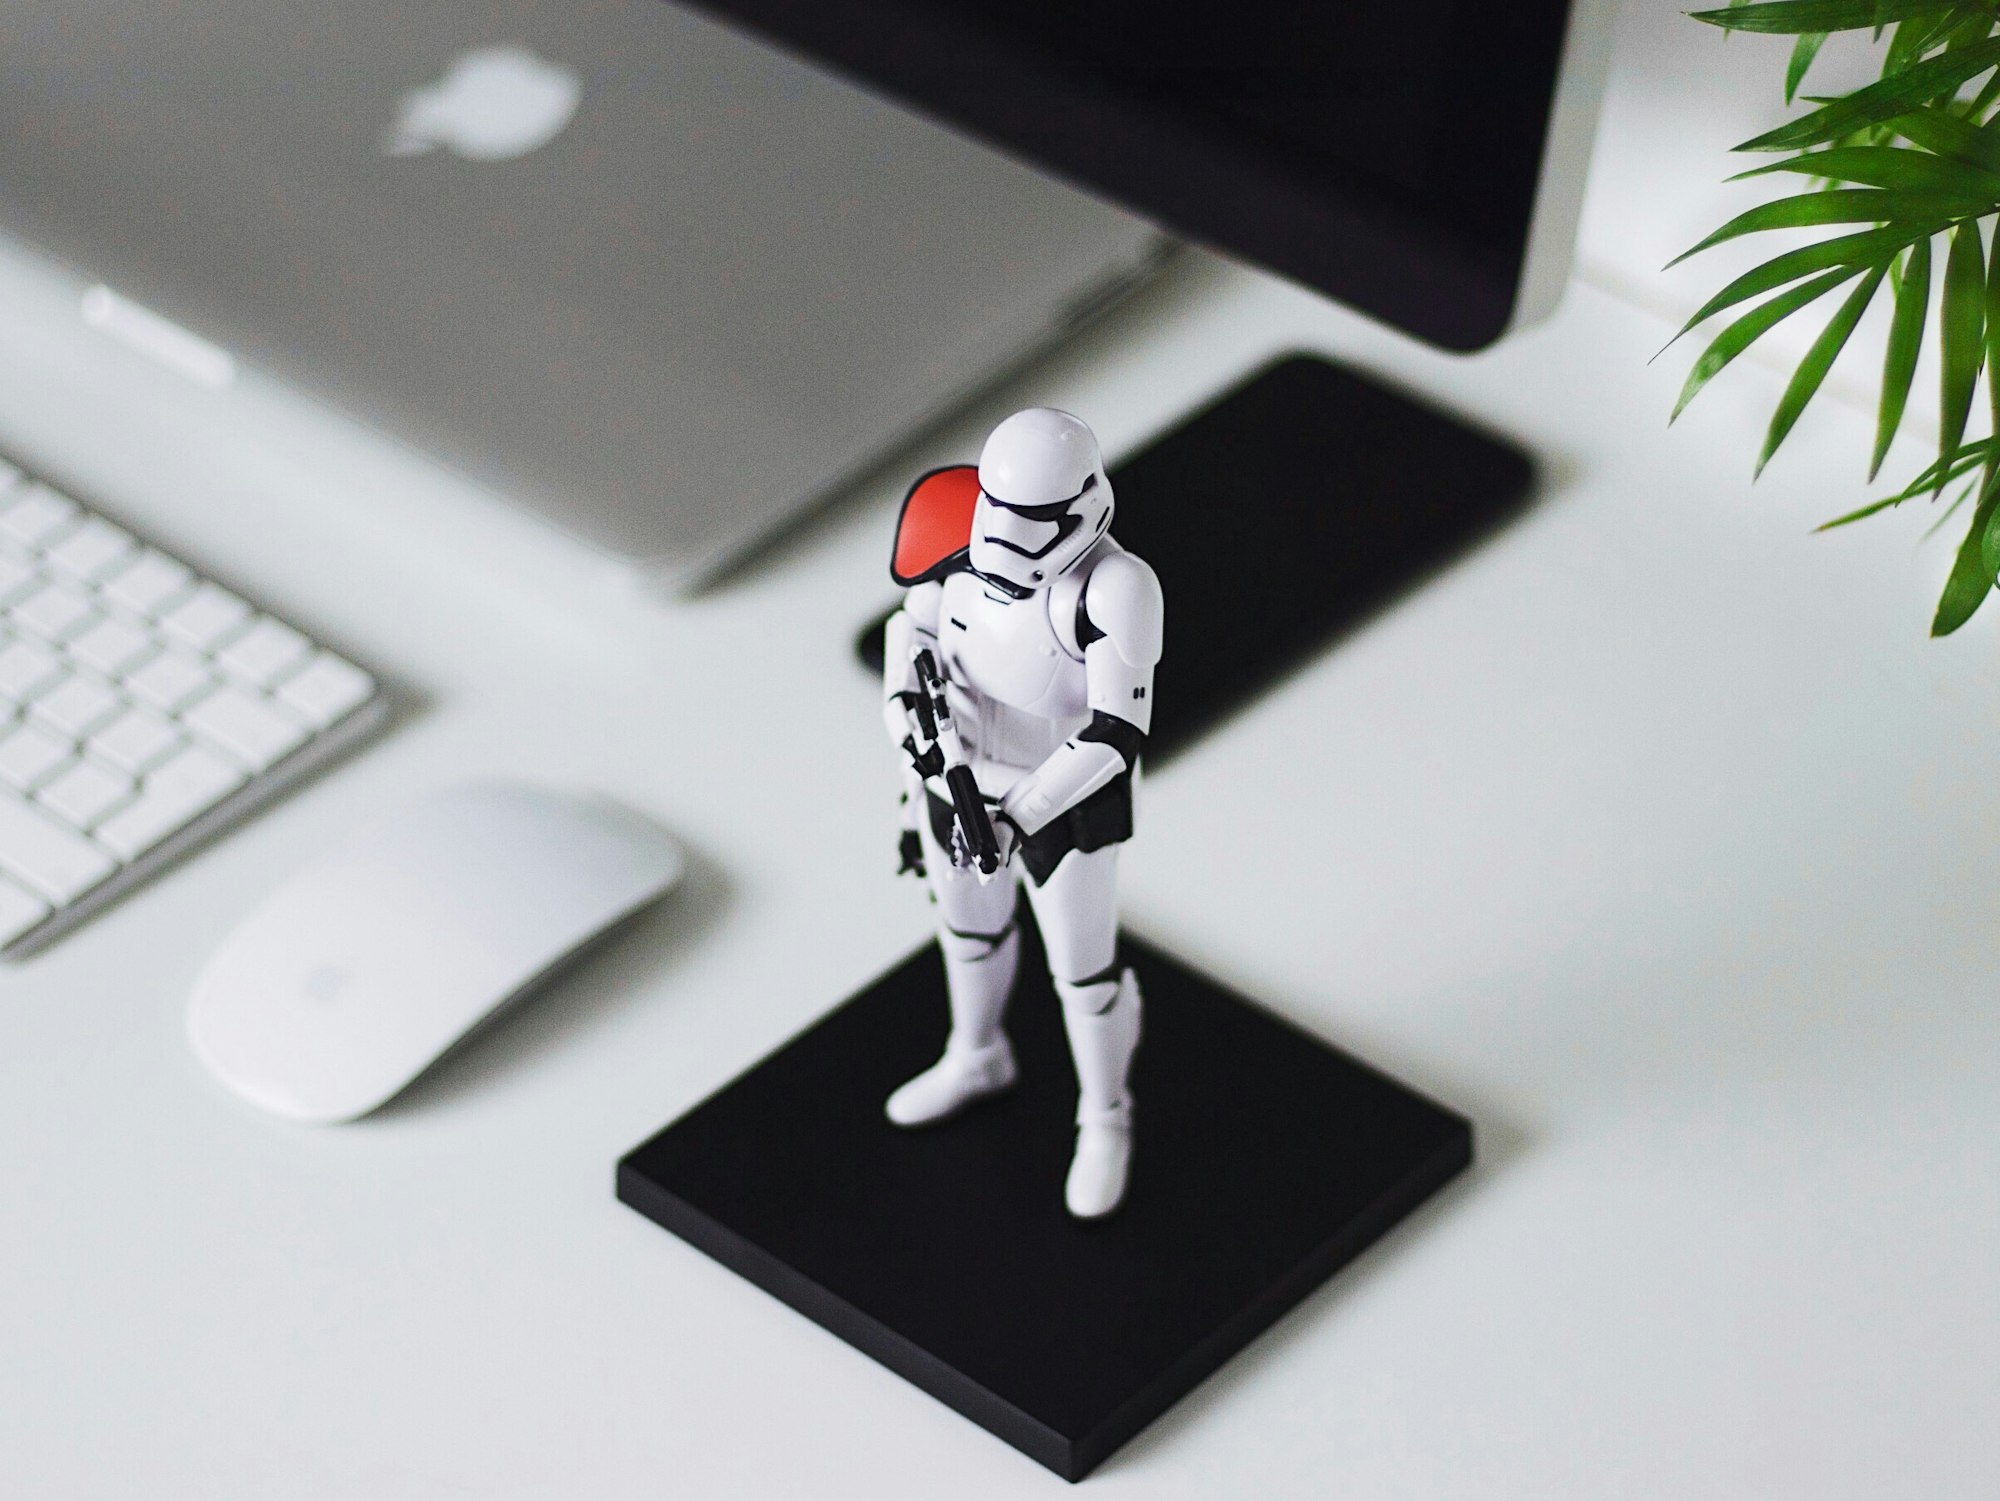 We love toys and all things geeky! The idea that this stormtrooper would guard our desk when away was something we wanted to try and capture. Also the white armour fits perfectly with the minimal aesthetic of our tech.